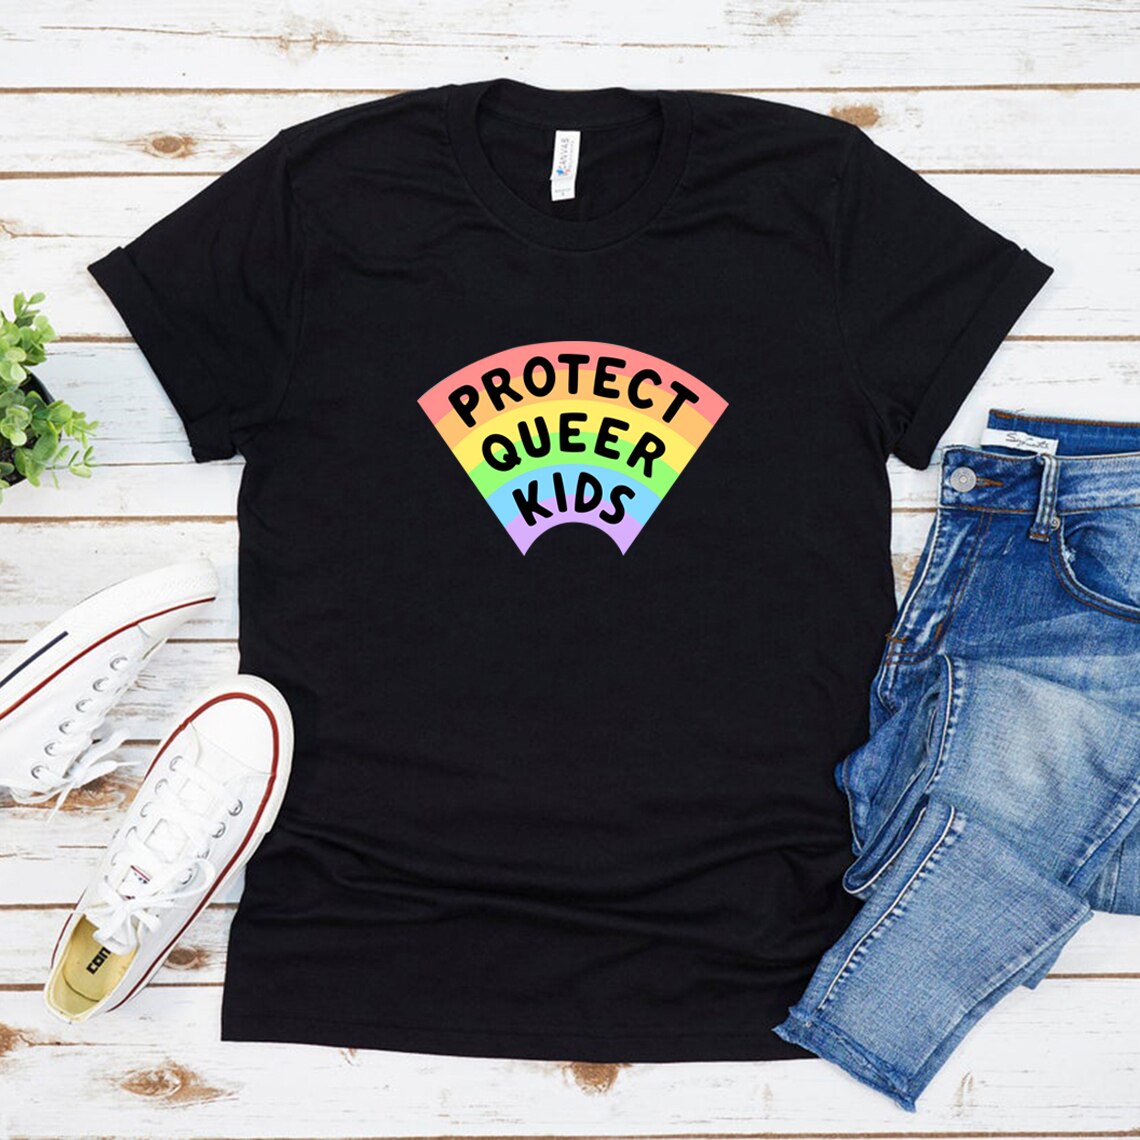 Protect Queer Kids T-Shirt